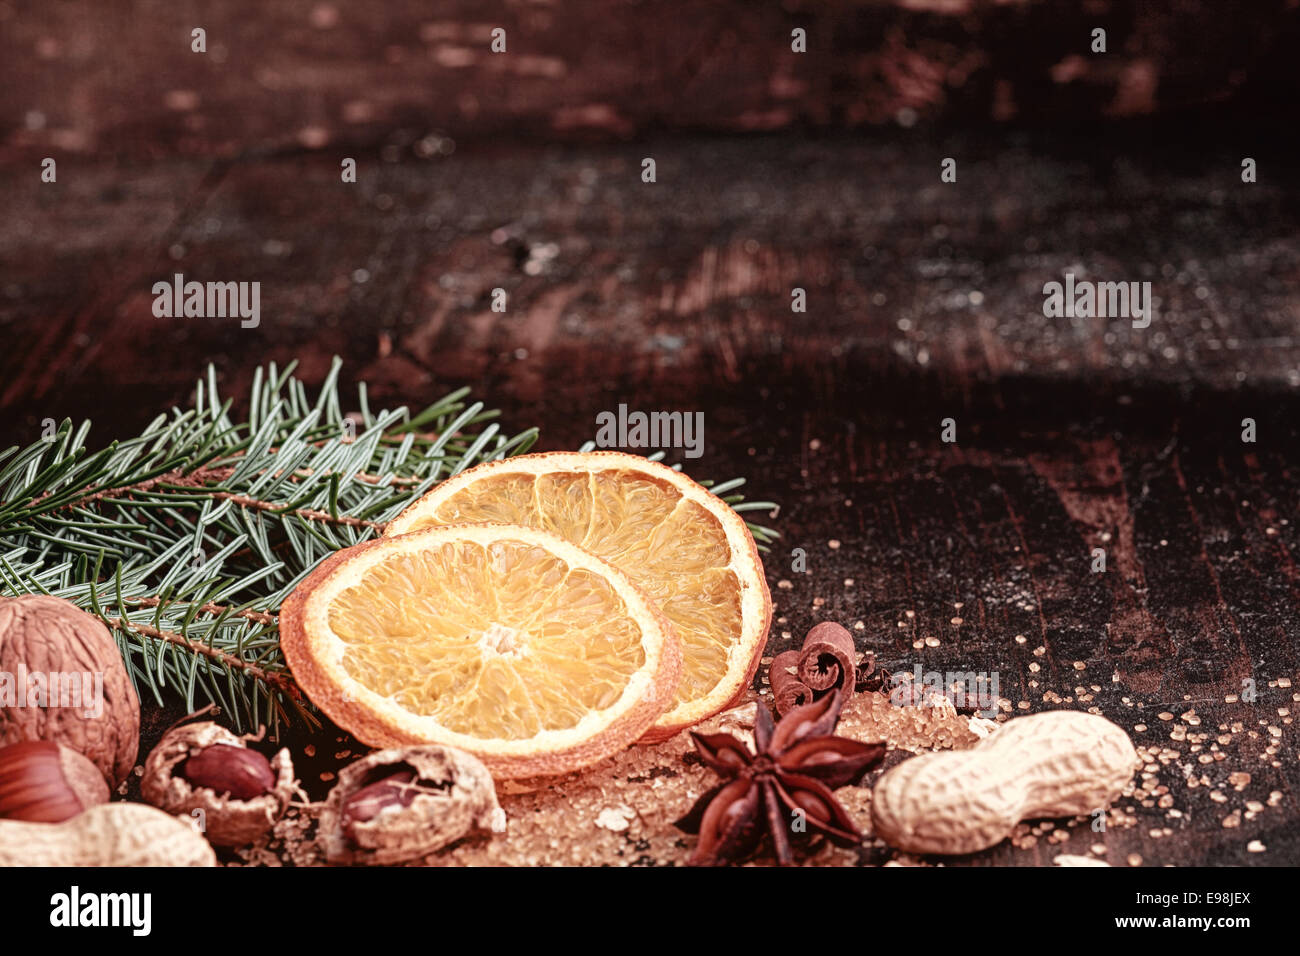 Sliced Christmas Orange, Nuts on Side, on Wooden Table Stock Photo